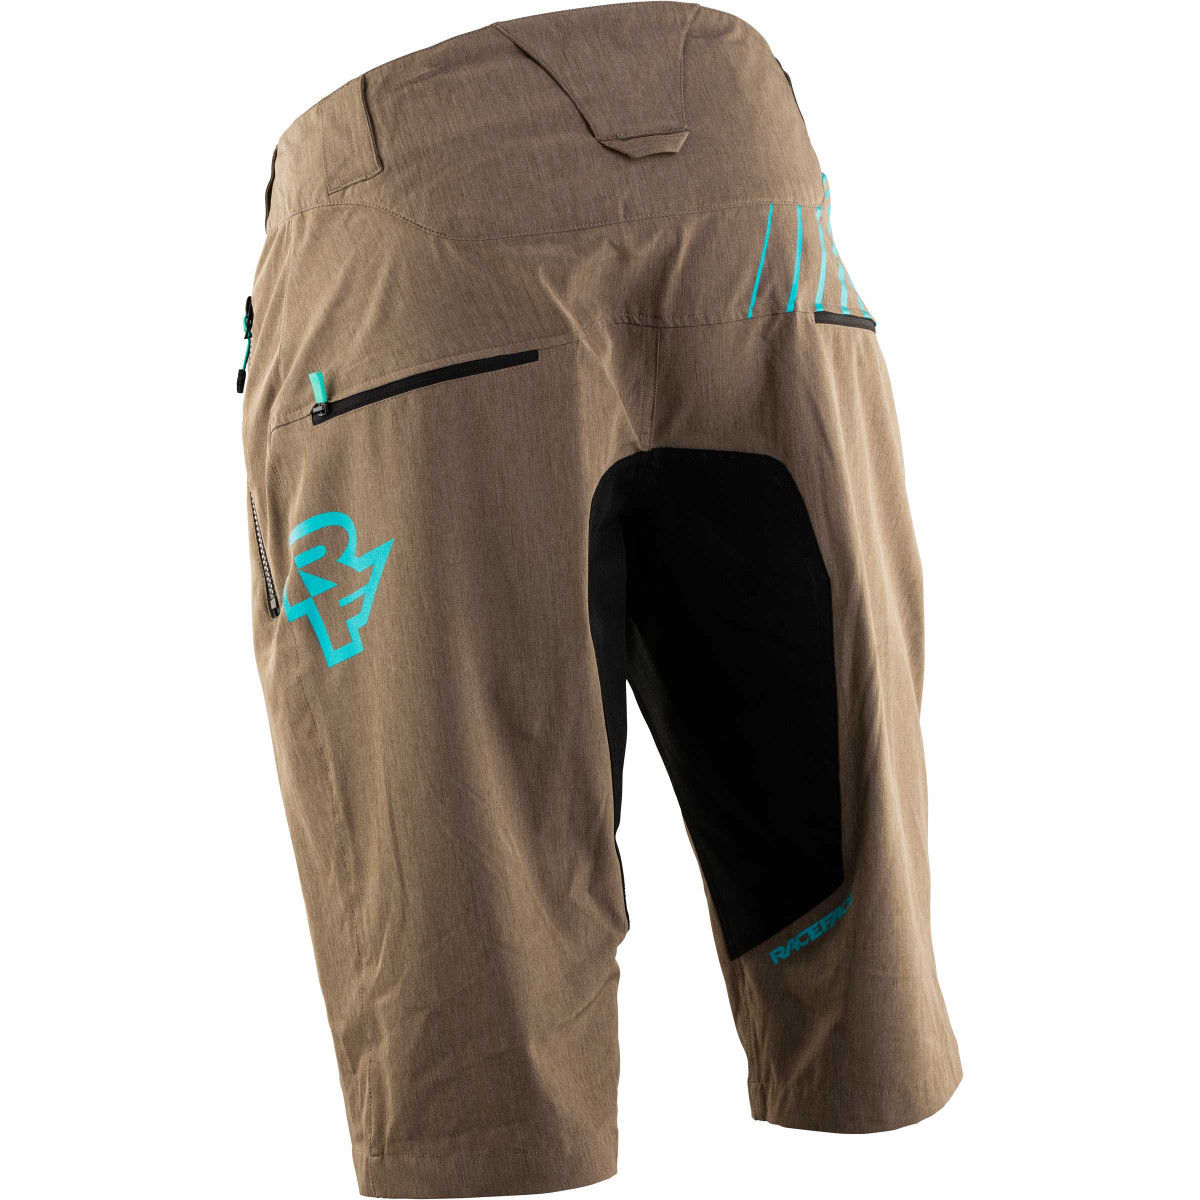 race face stage shorts review